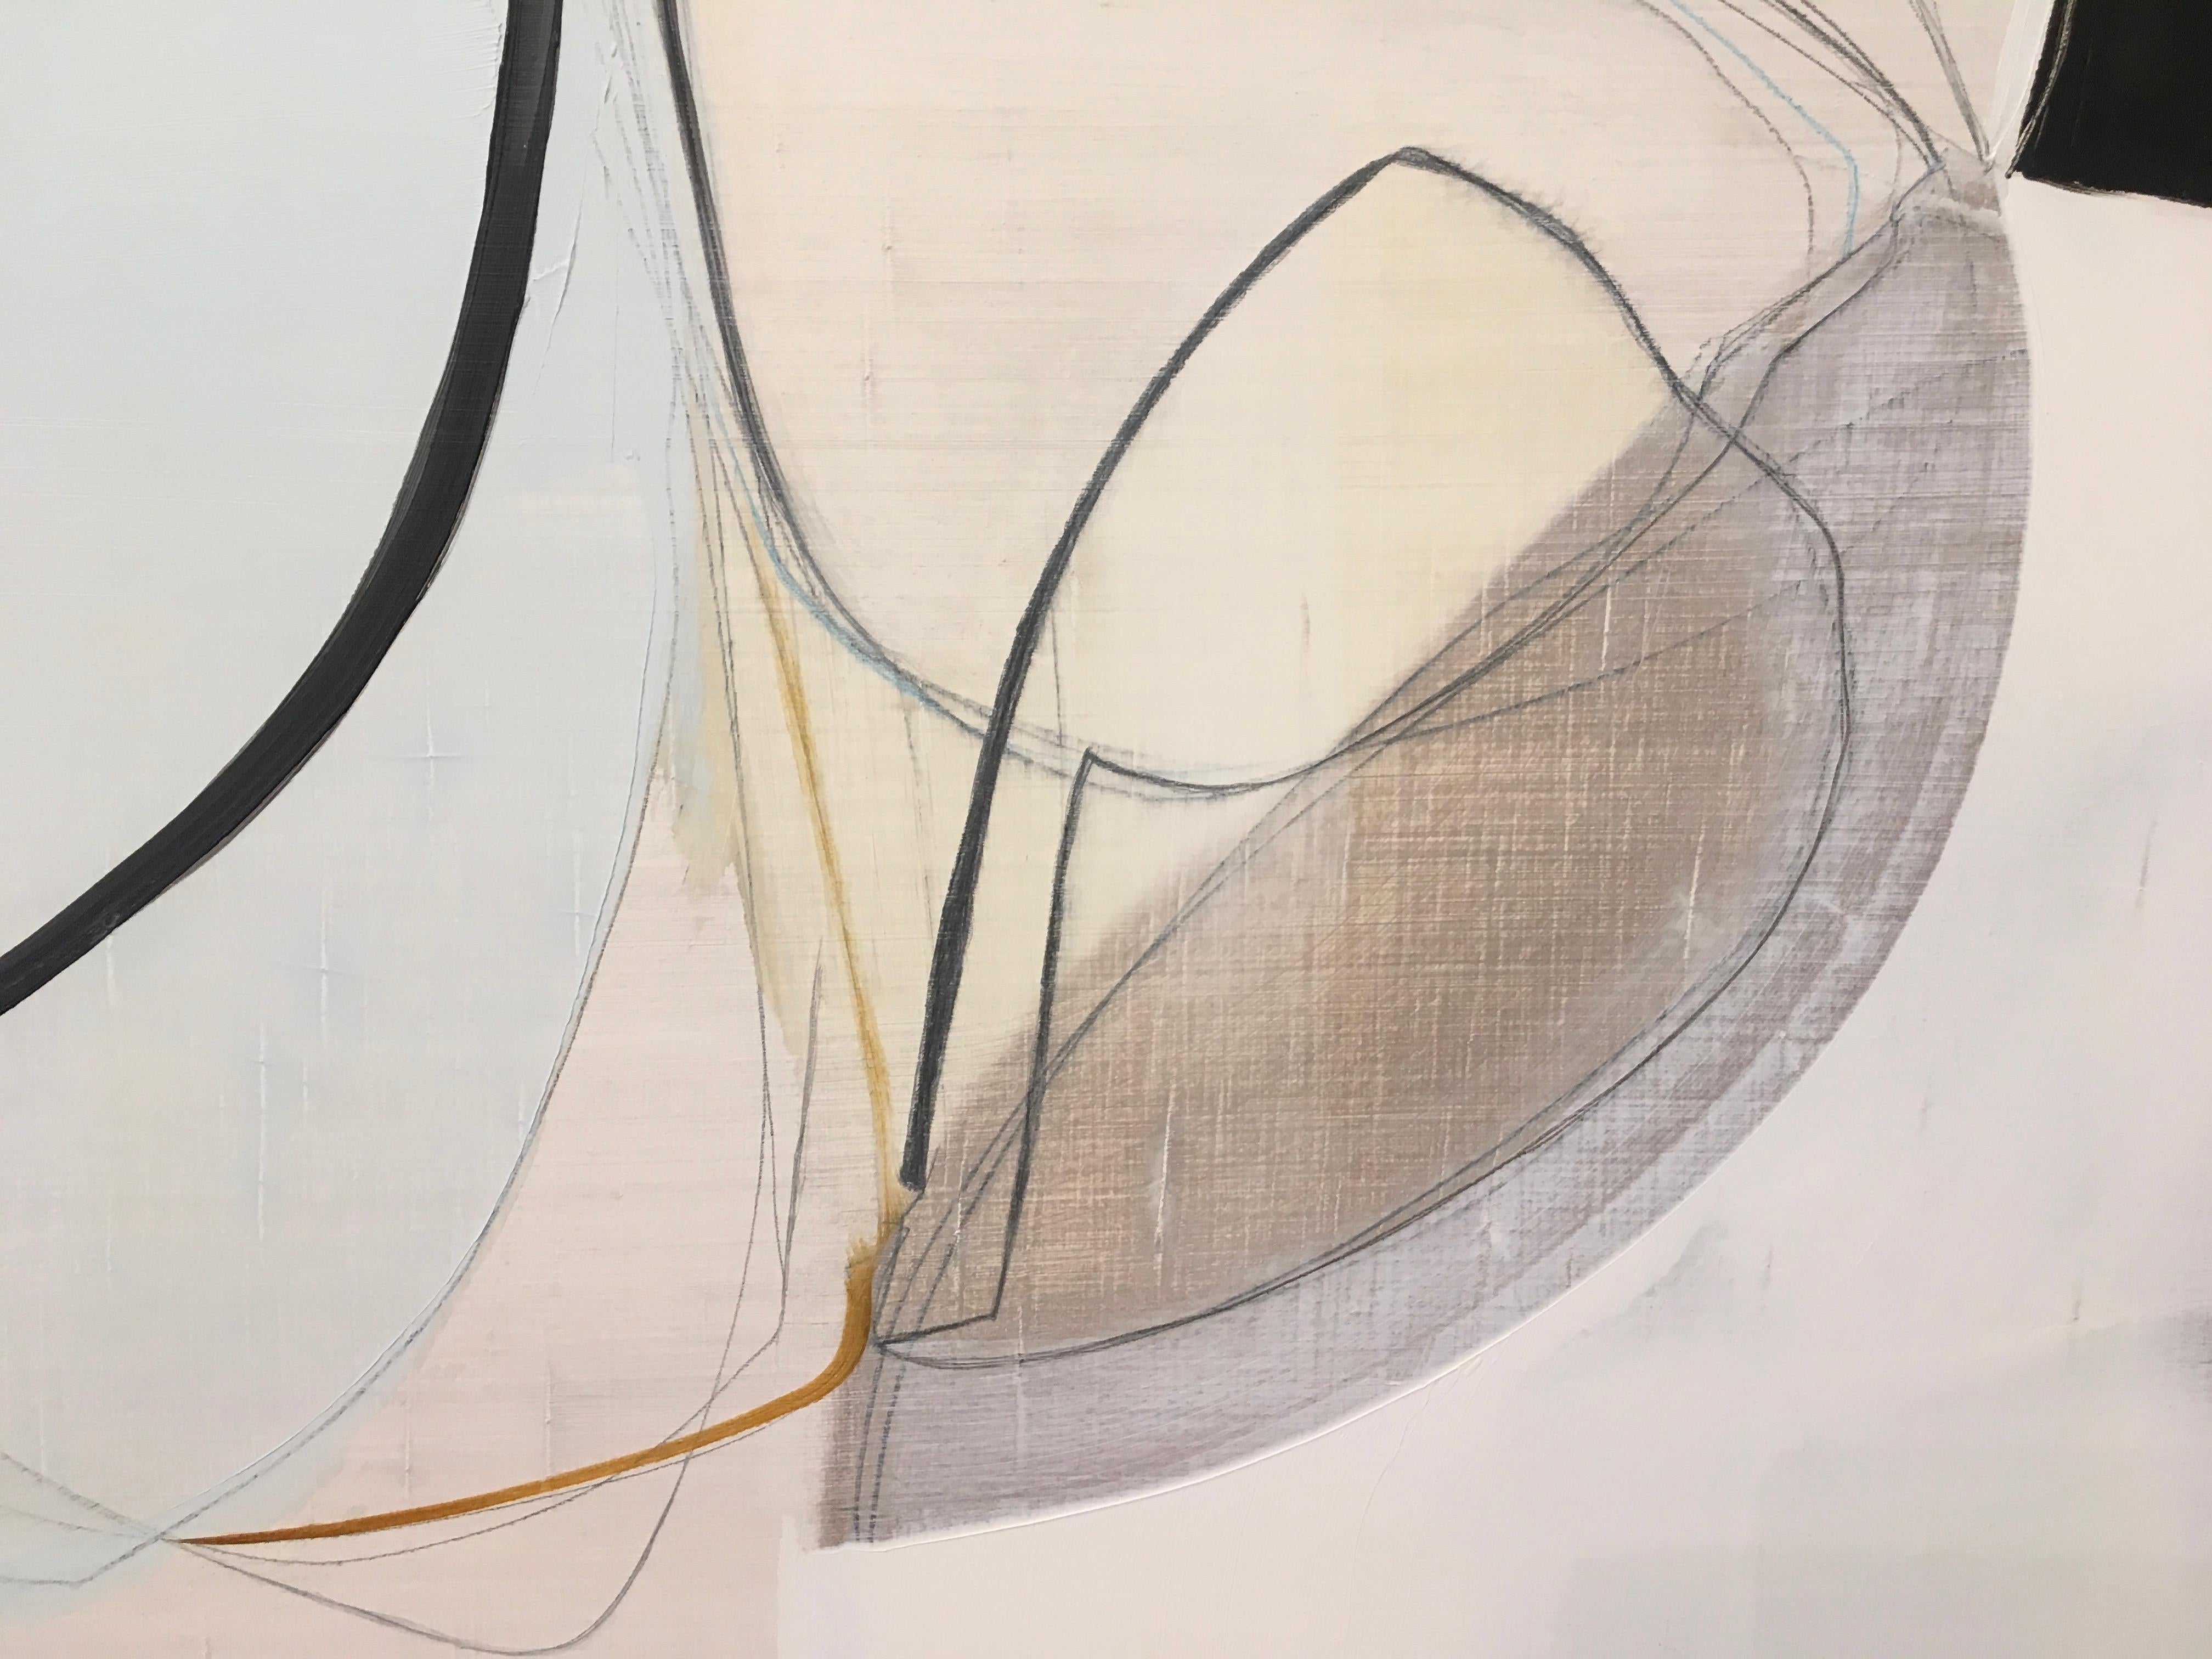 Ruffle & Fold by Rose Umerlik is an abstract painting, Oil and Graphite on wood panel, 26 x 42.  It has finished edges.

Rose Umerlik extracts the intangible emotional moments that live in our collective human psyche and interprets them abstractly